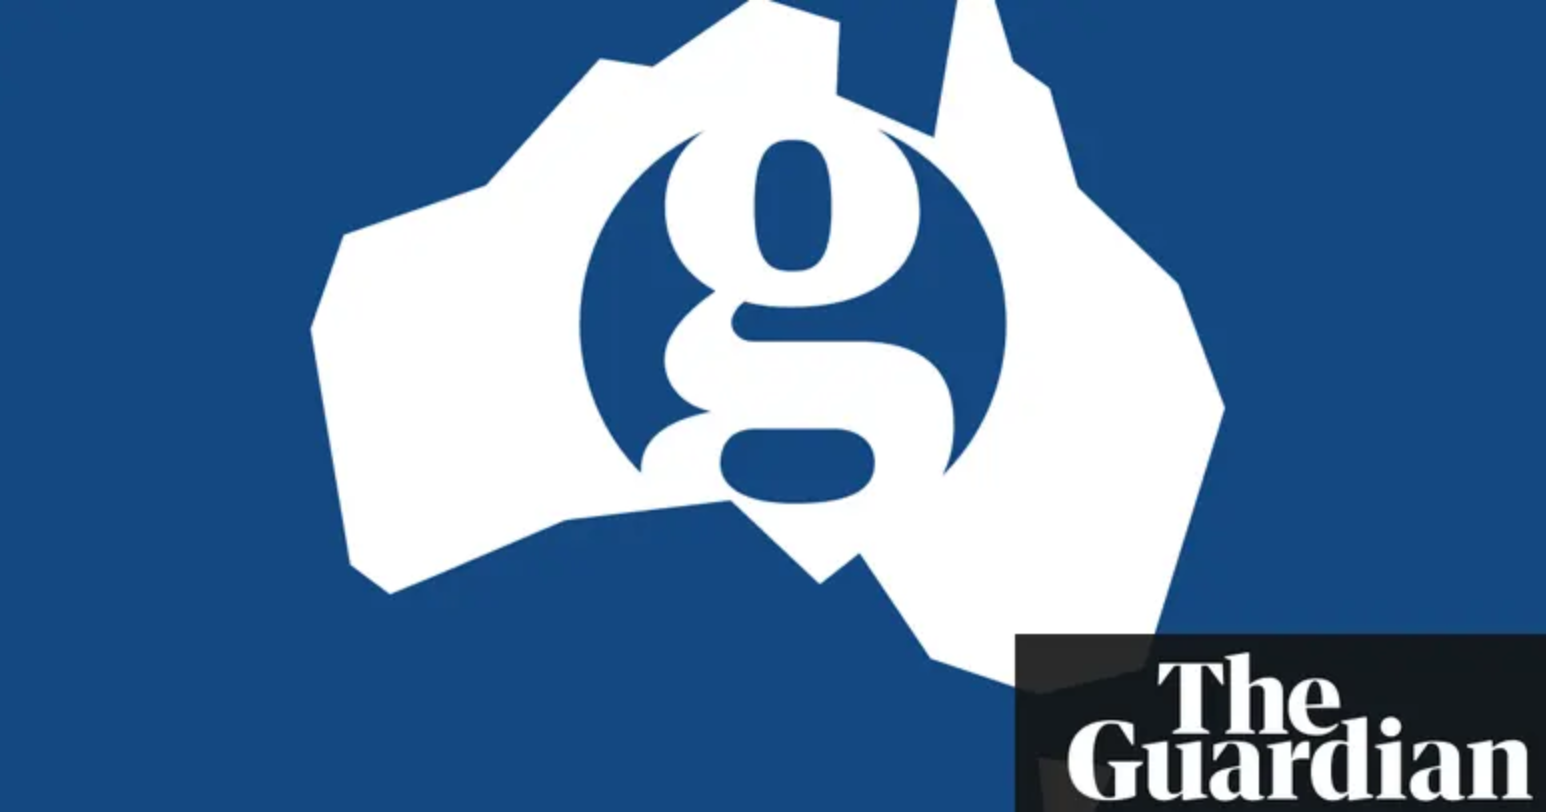 A graphic of The Guardian's logo overlaid on a map of Austral